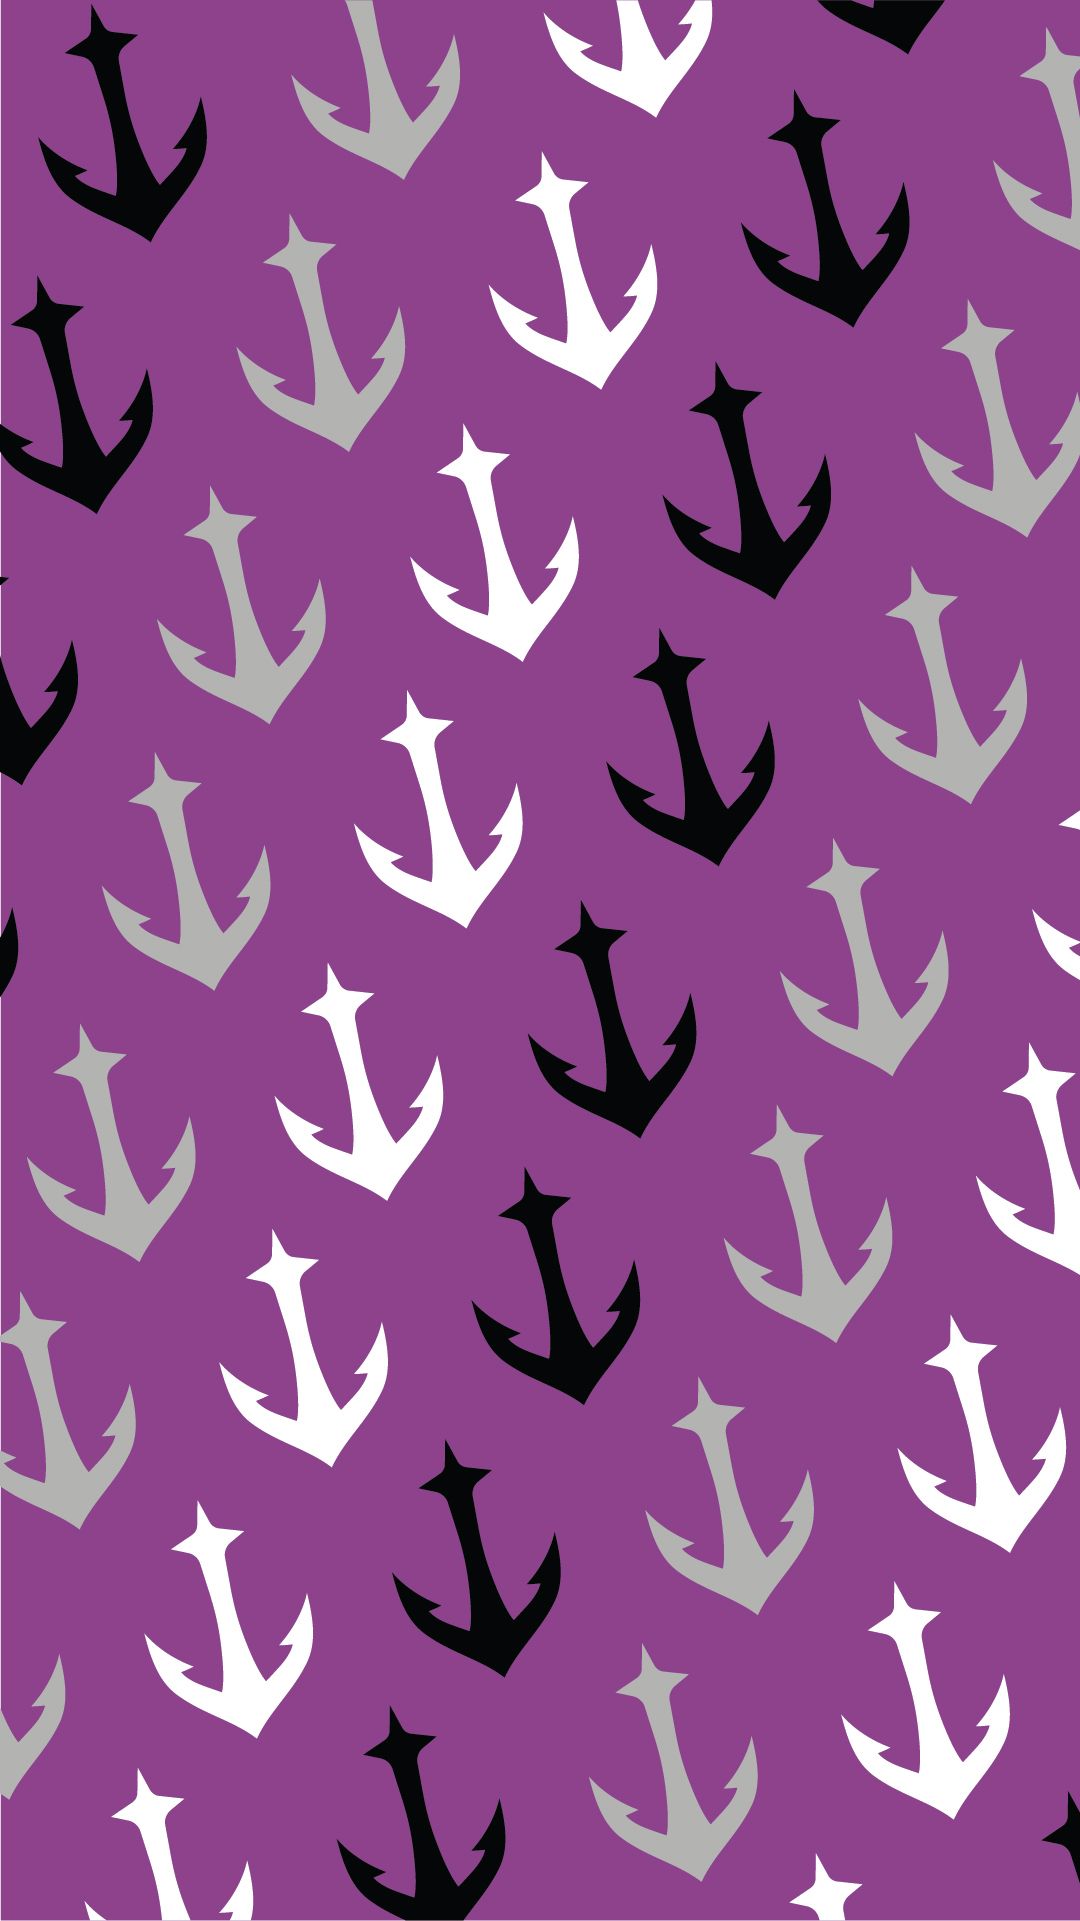 A pattern of black, white and grey anchors on a purple background - Pride